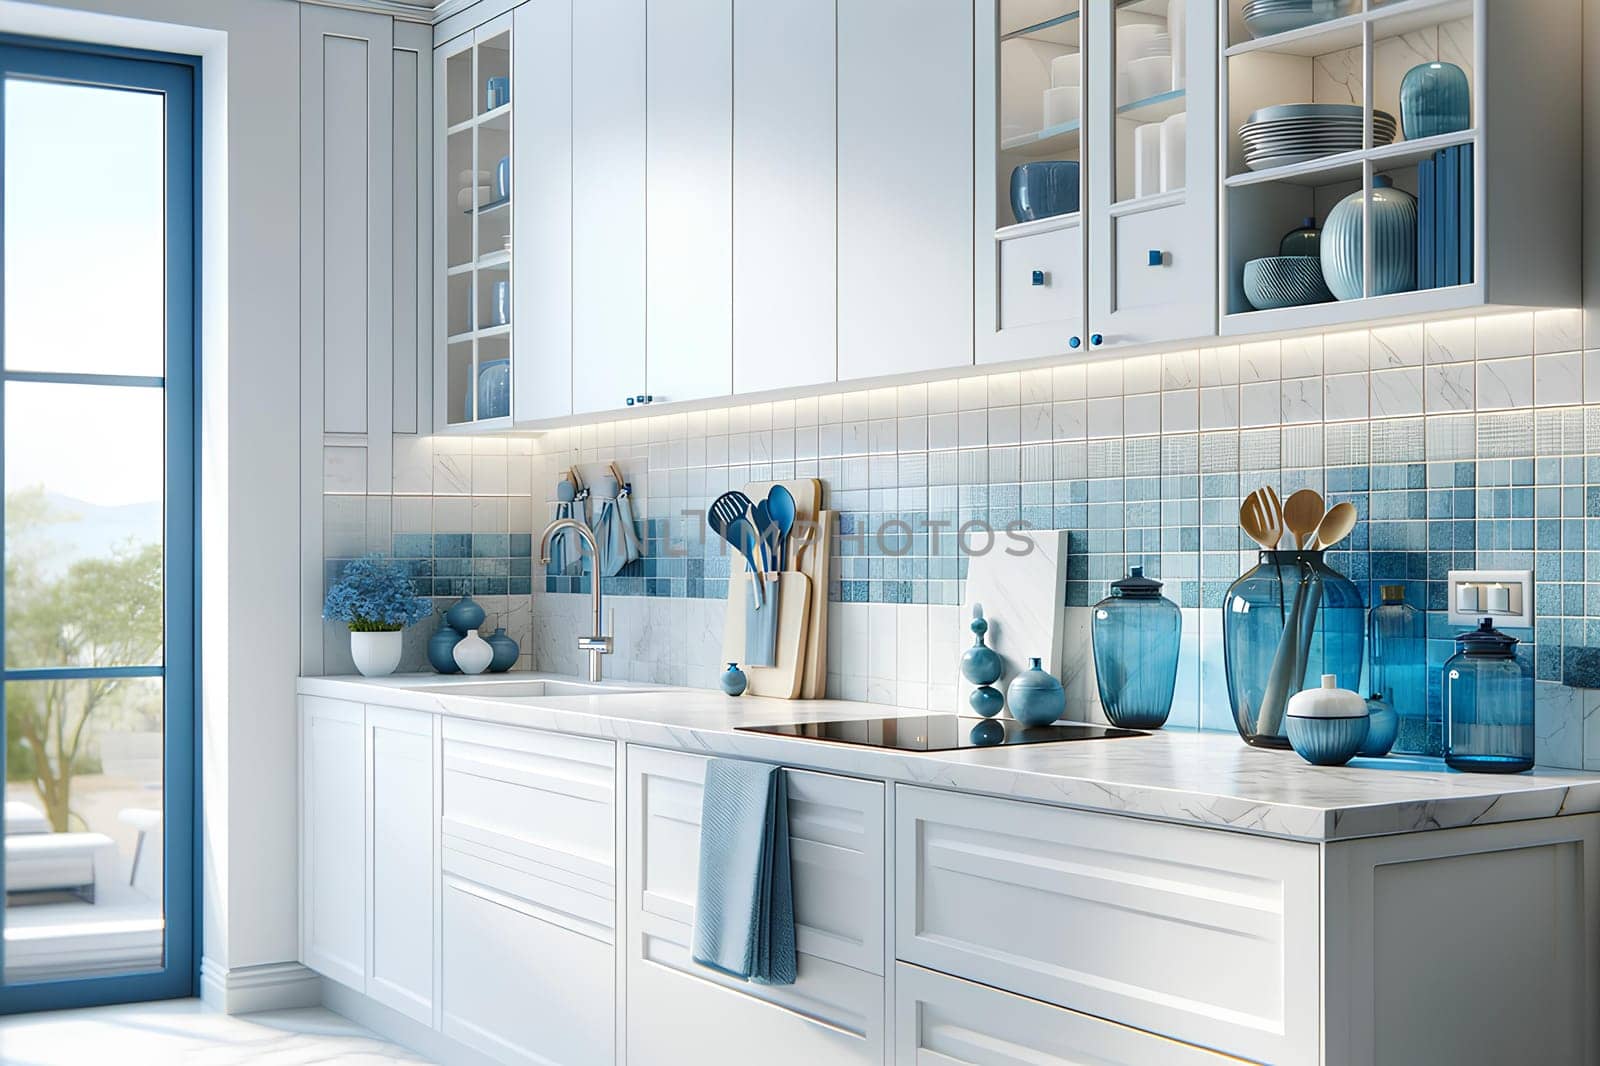 modern kitchen interior with white furniture and blue decorative elements.